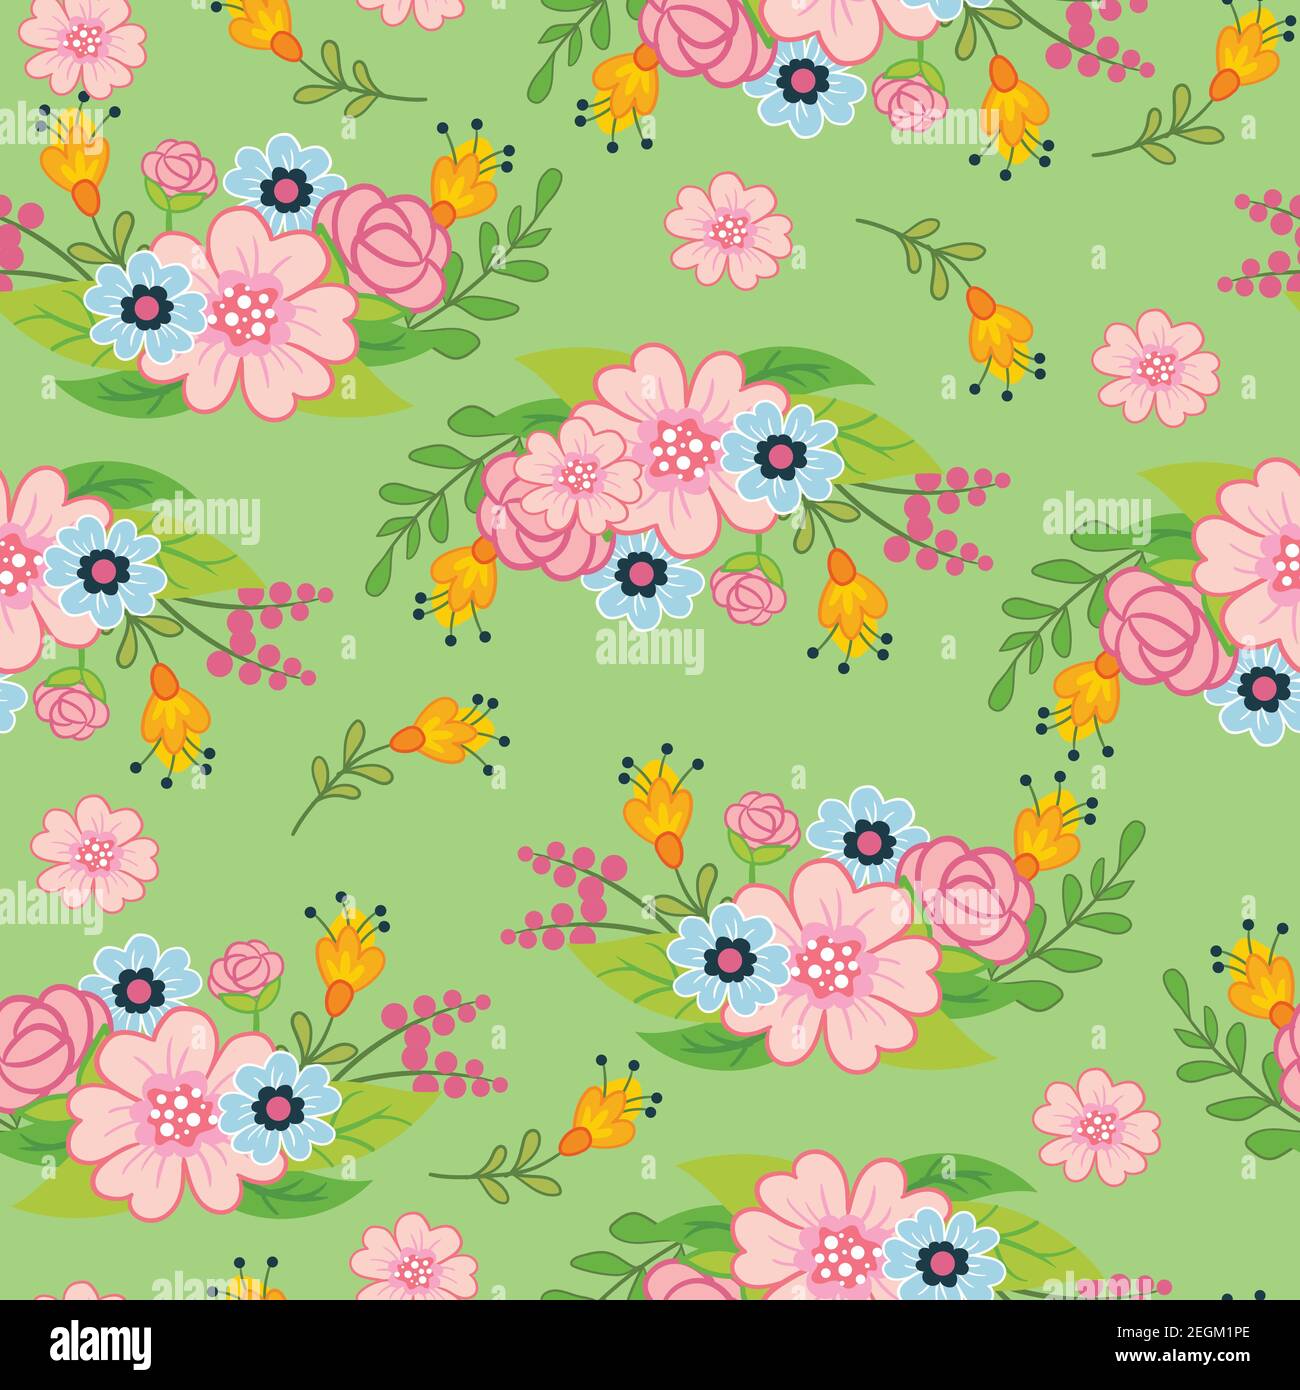 Seamless vector pattern with spring concept. floral motif. Colorful illustration isolated on white background. For print, t-shirt, design, wallpaper, Stock Vector